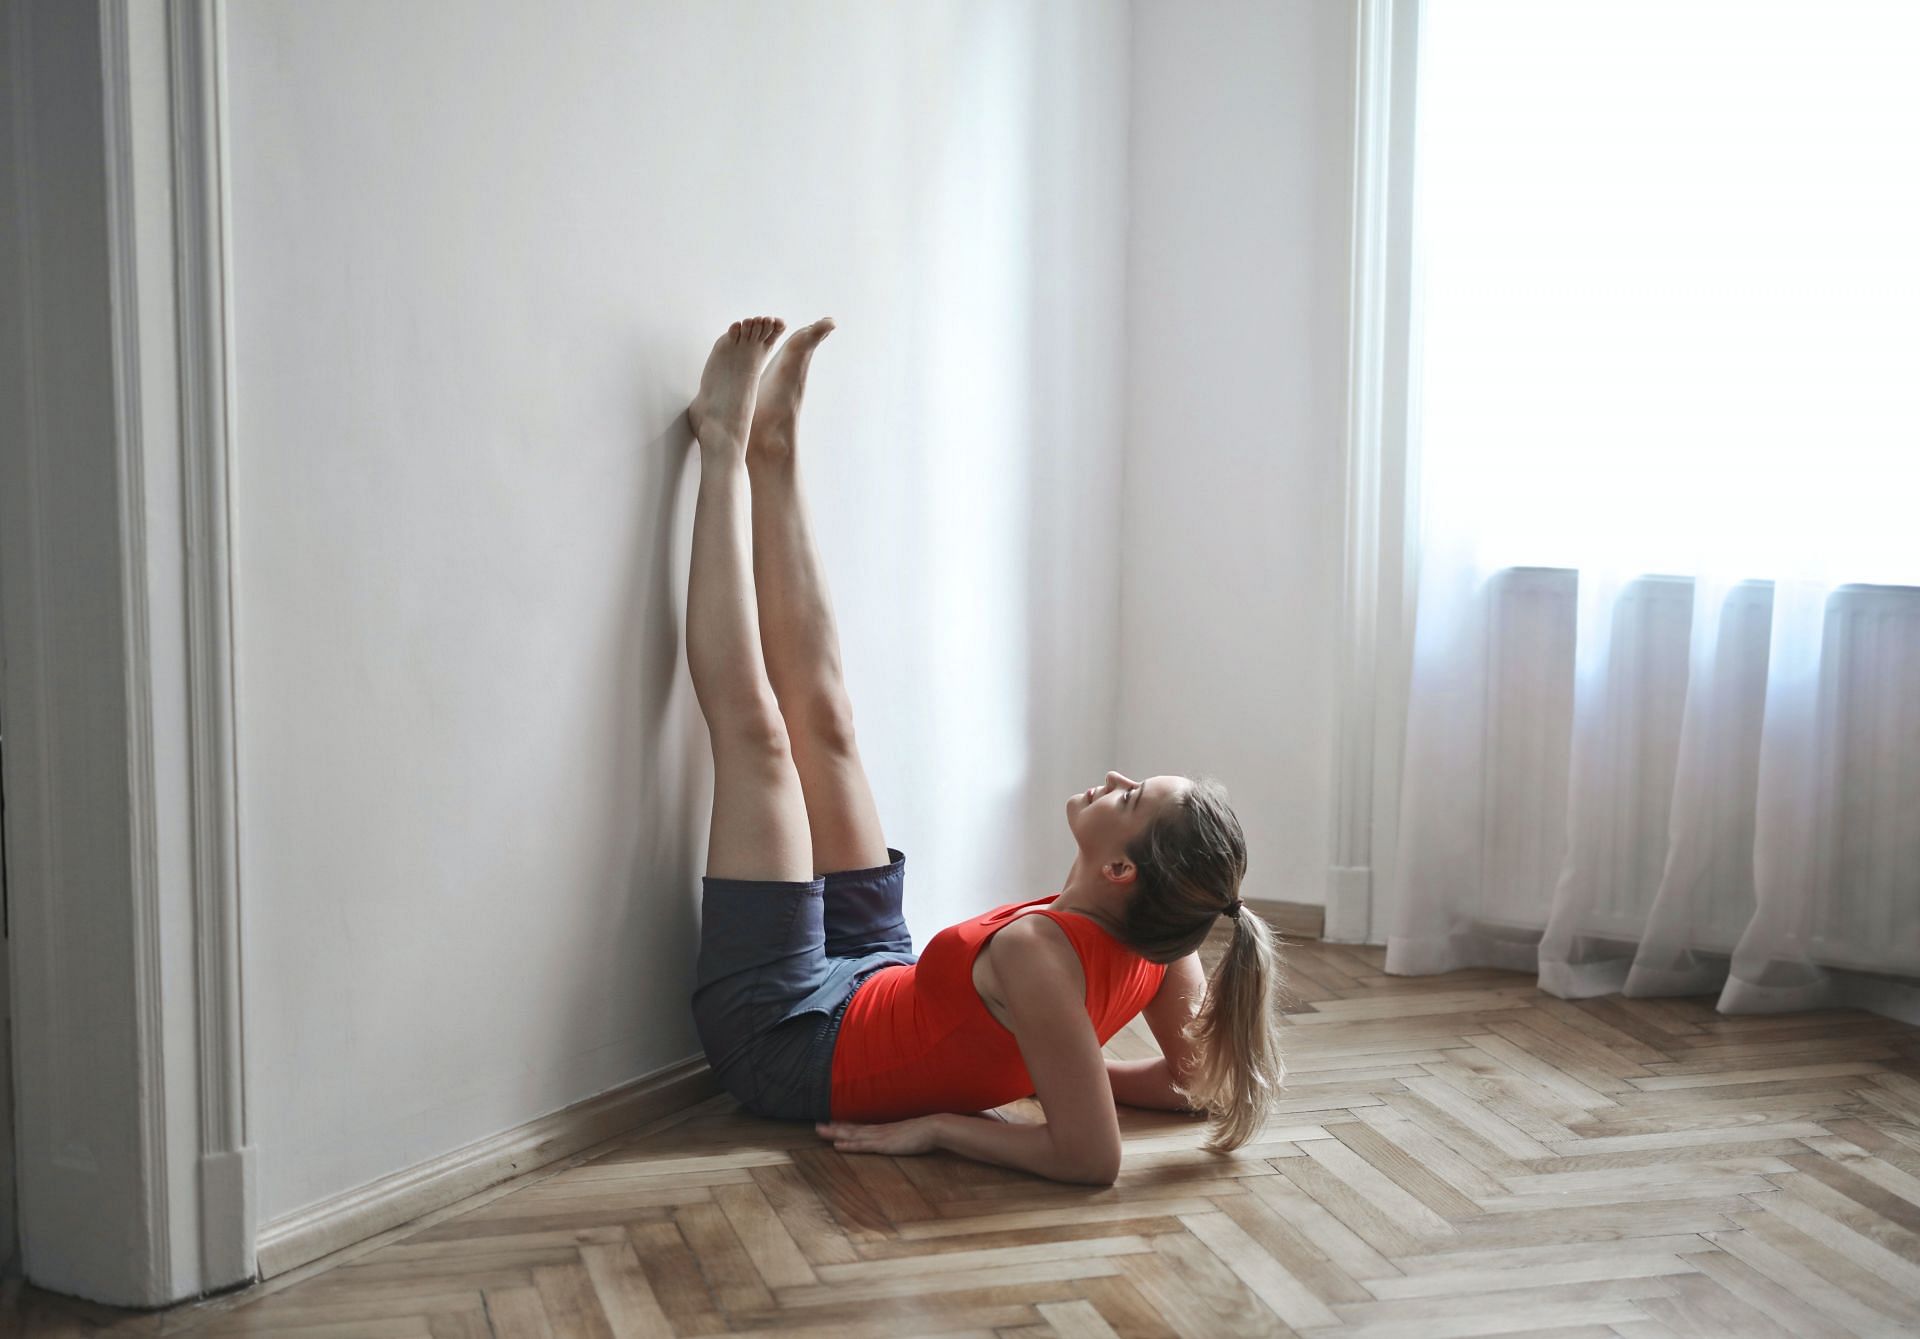 Healthy Street - 🔈 VIPARITA KARANI POSE - FOR LYMPH CIRCULATION, KNEE  PAIN, CONGESTED PELVIC ORGANS HOW TO DO IT? Stack a couple of folded  blankets on top of a bolster near